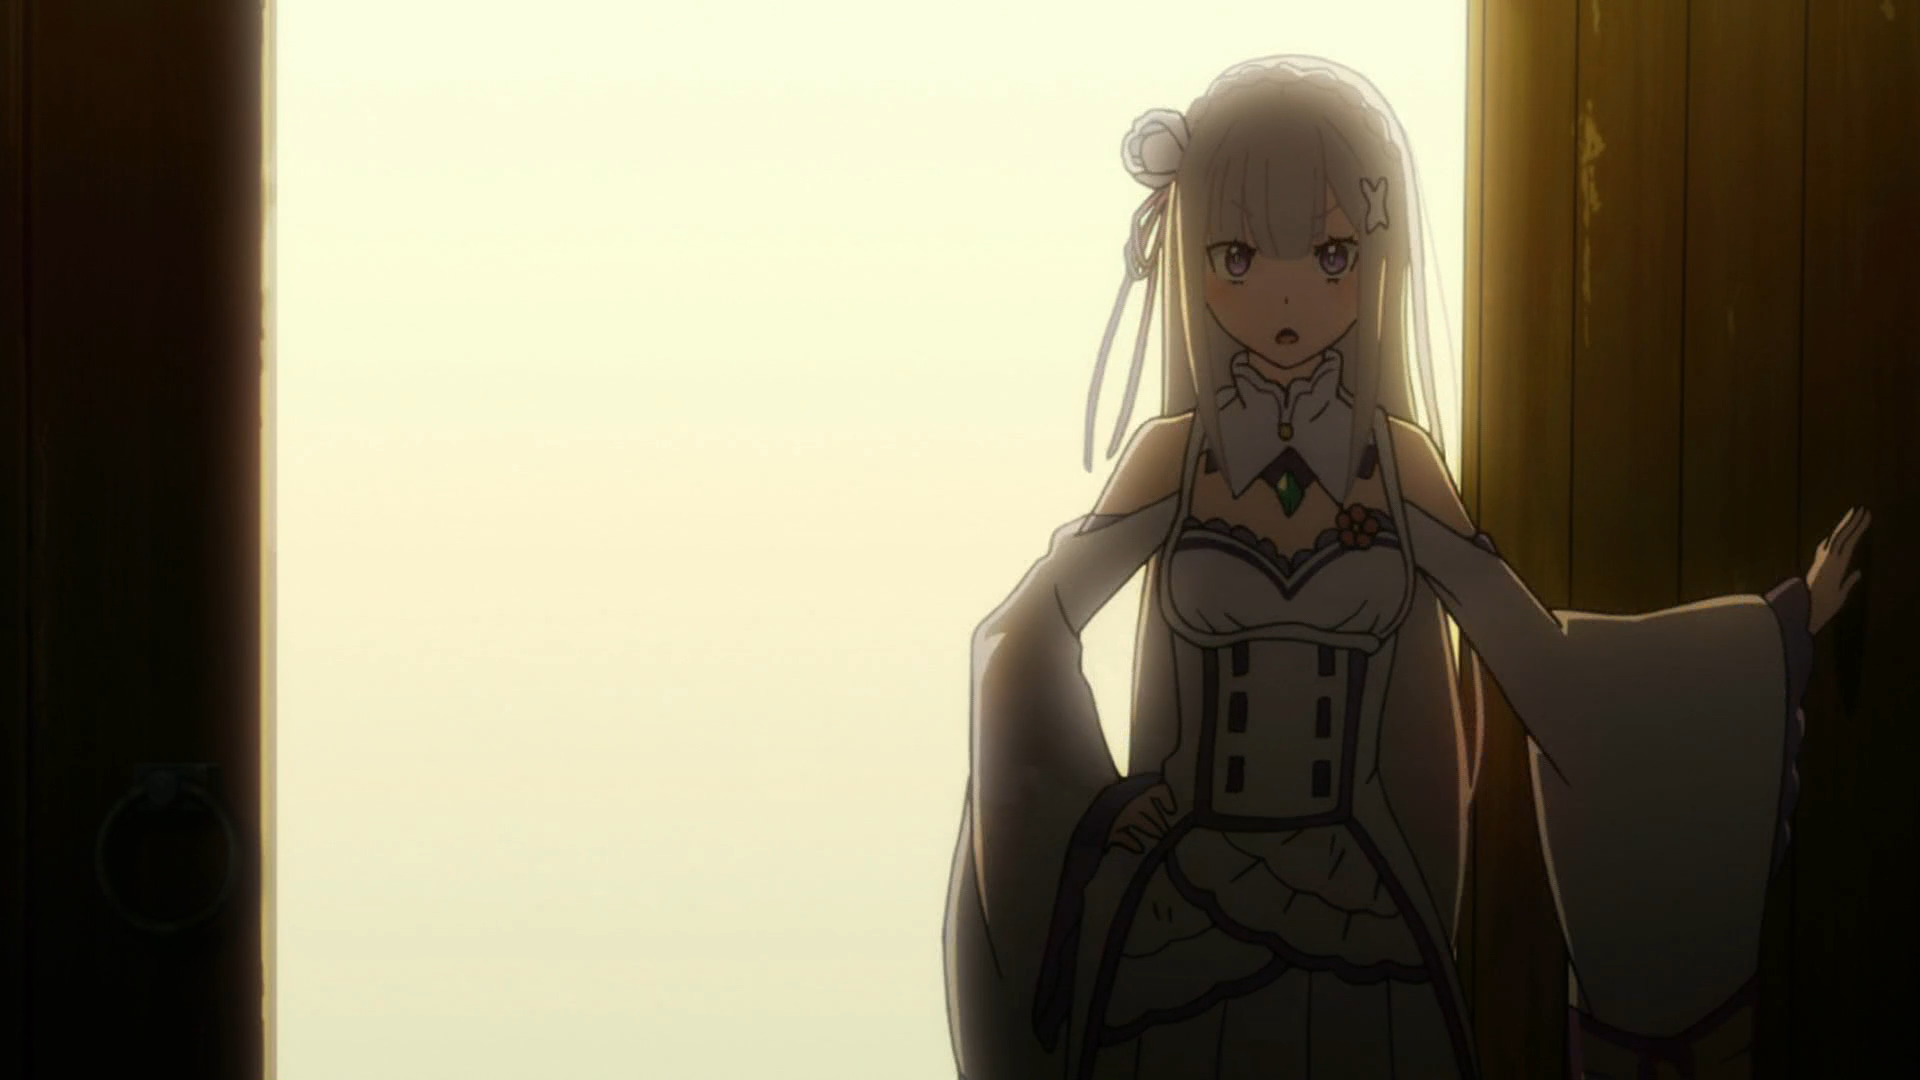 Reinhard to the Rescue – Re: Zero S1 Episode 2 Review – In Asian Spaces